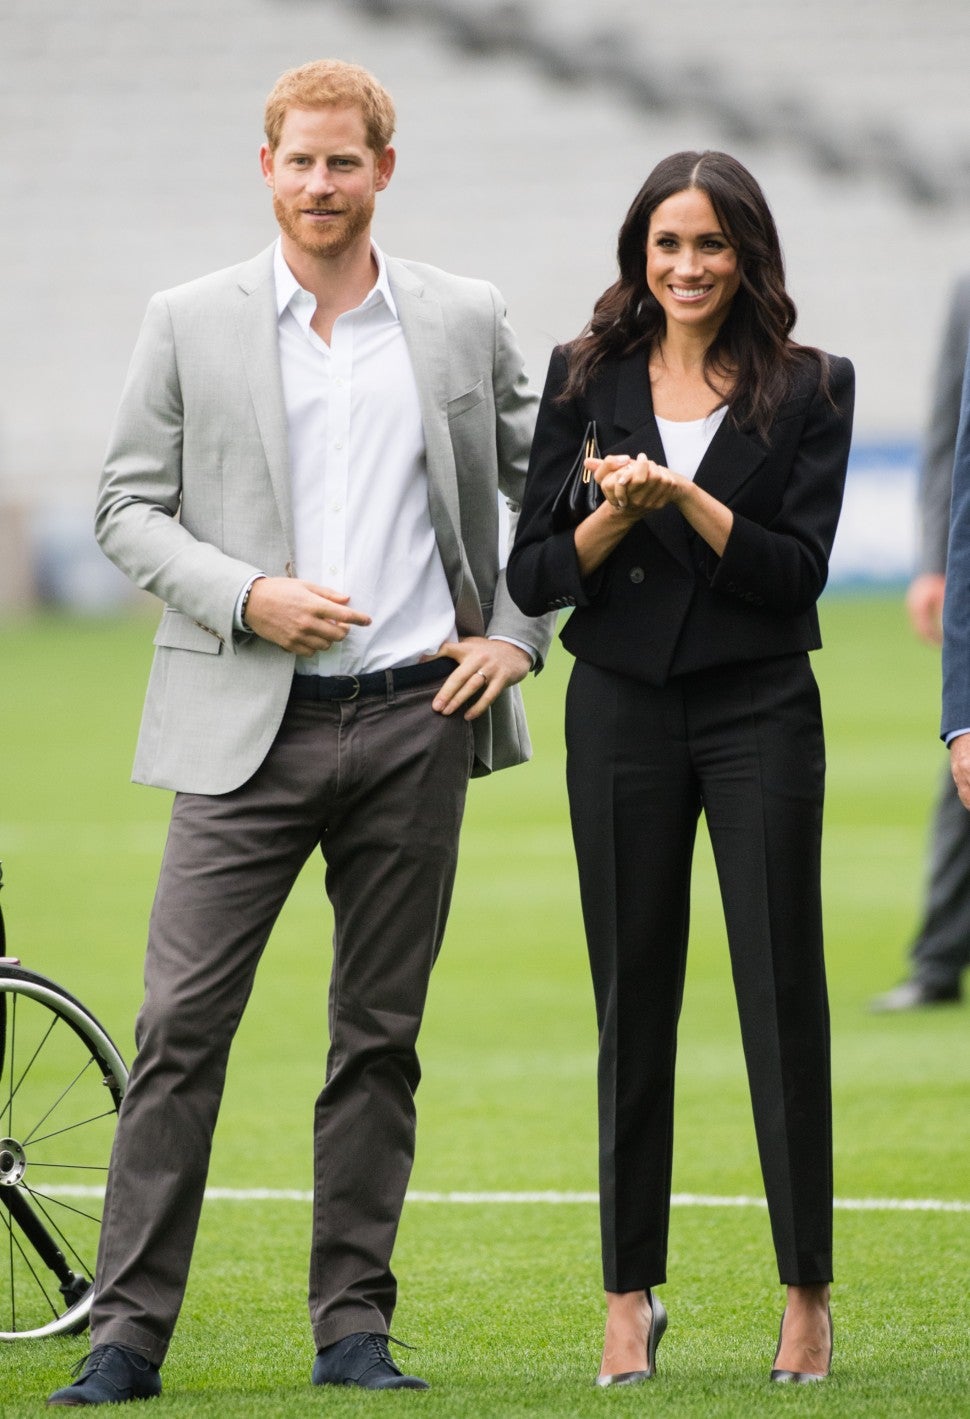 Meghan Markle in black pantsuit with Prince Harry on soccer field